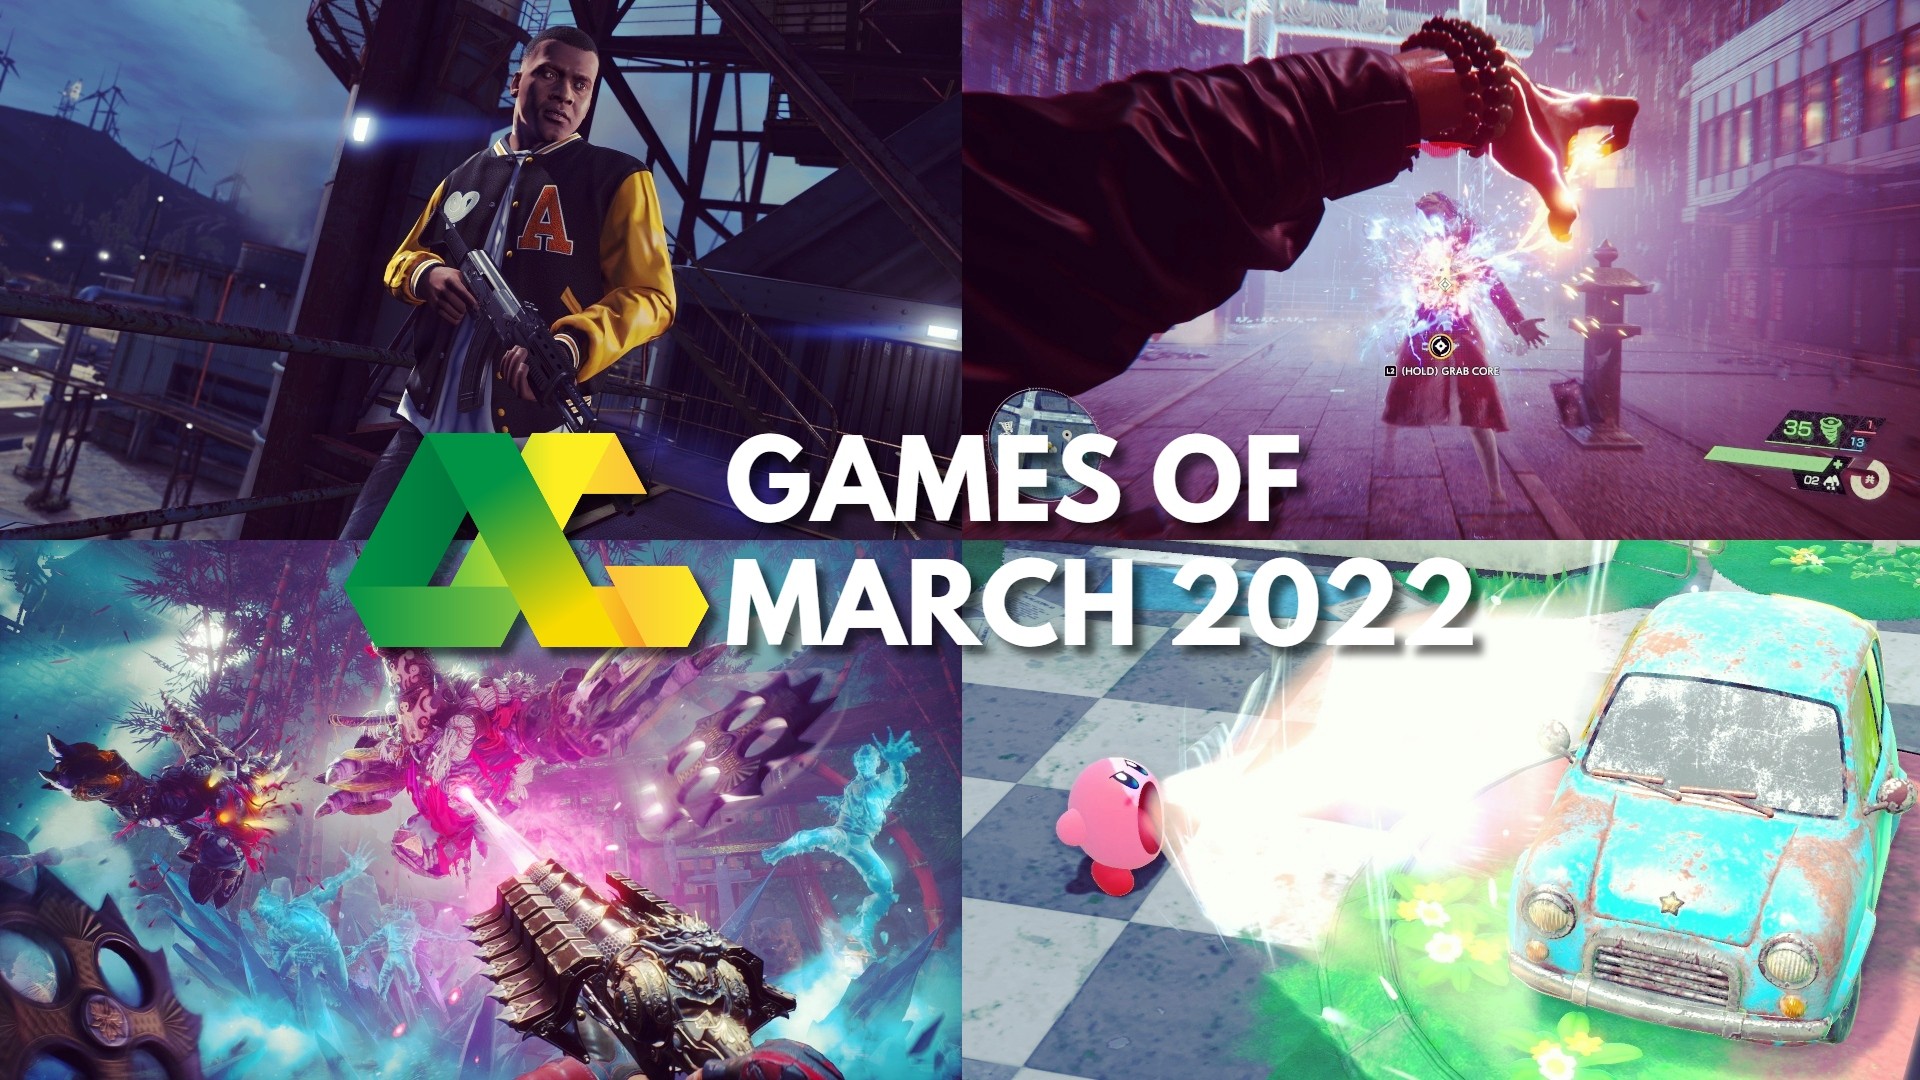 Square Enix's Lineup For Tokyo Game Show 2022 Is Fully Stacked